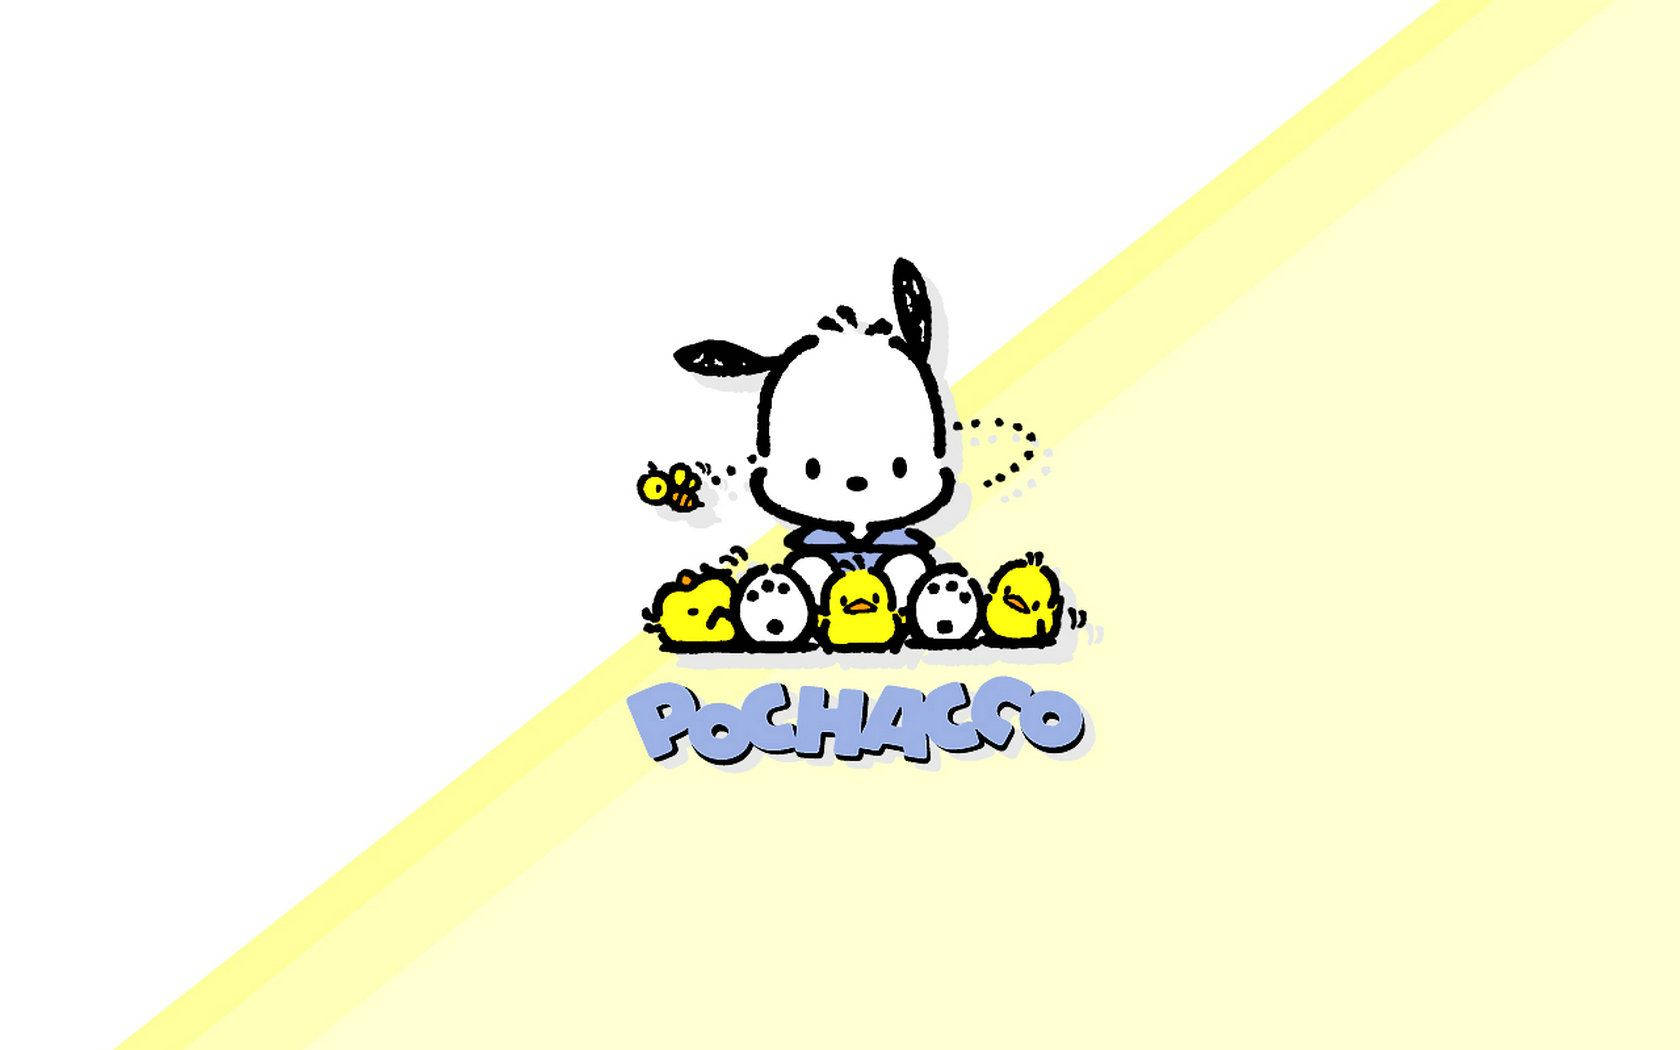 Pochacco In Two-toned Poster Background